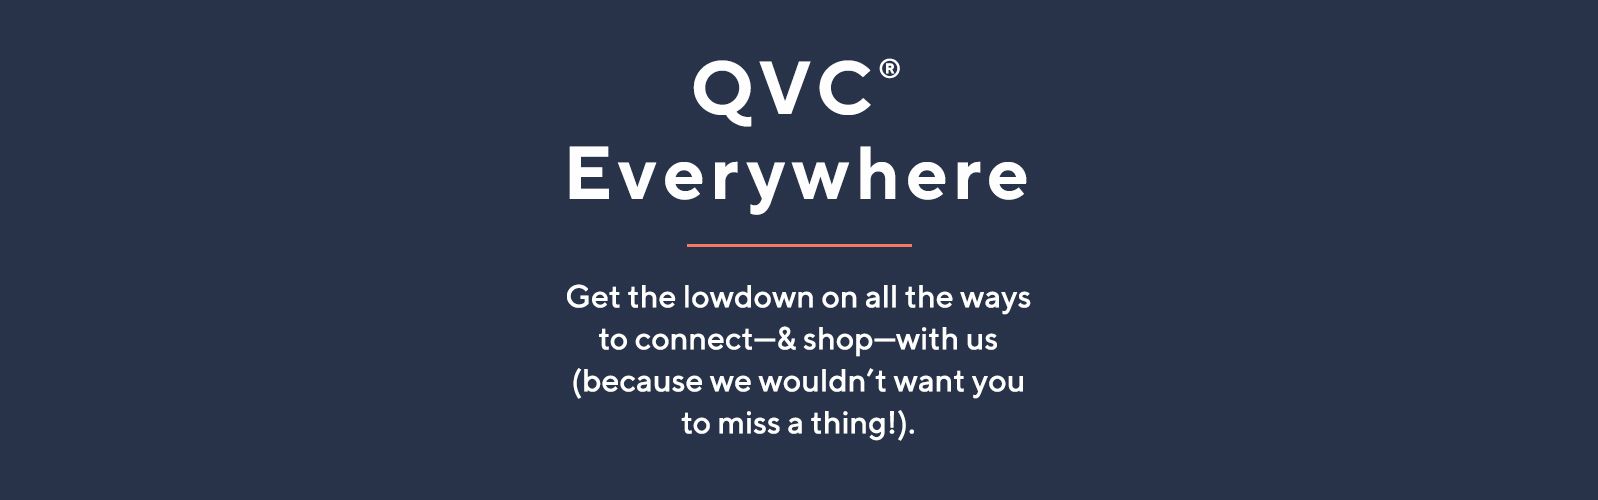 QVC® Everywhere. Get the lowdown on all the ways to connect—& shop—with us (because we wouldn’t want you to miss a thing!).